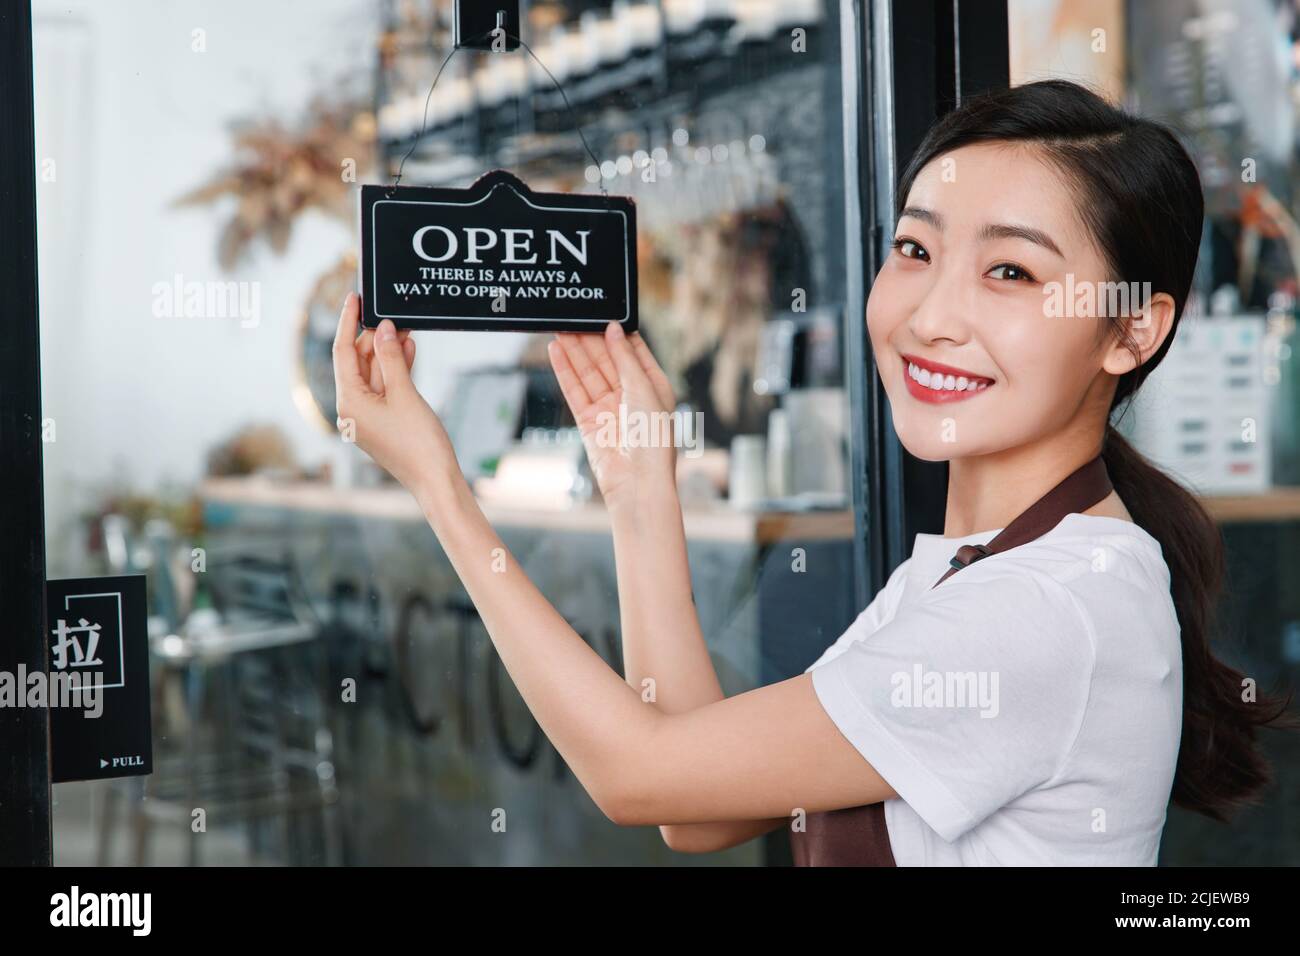 A waitress in a coffee shop Stock Photo